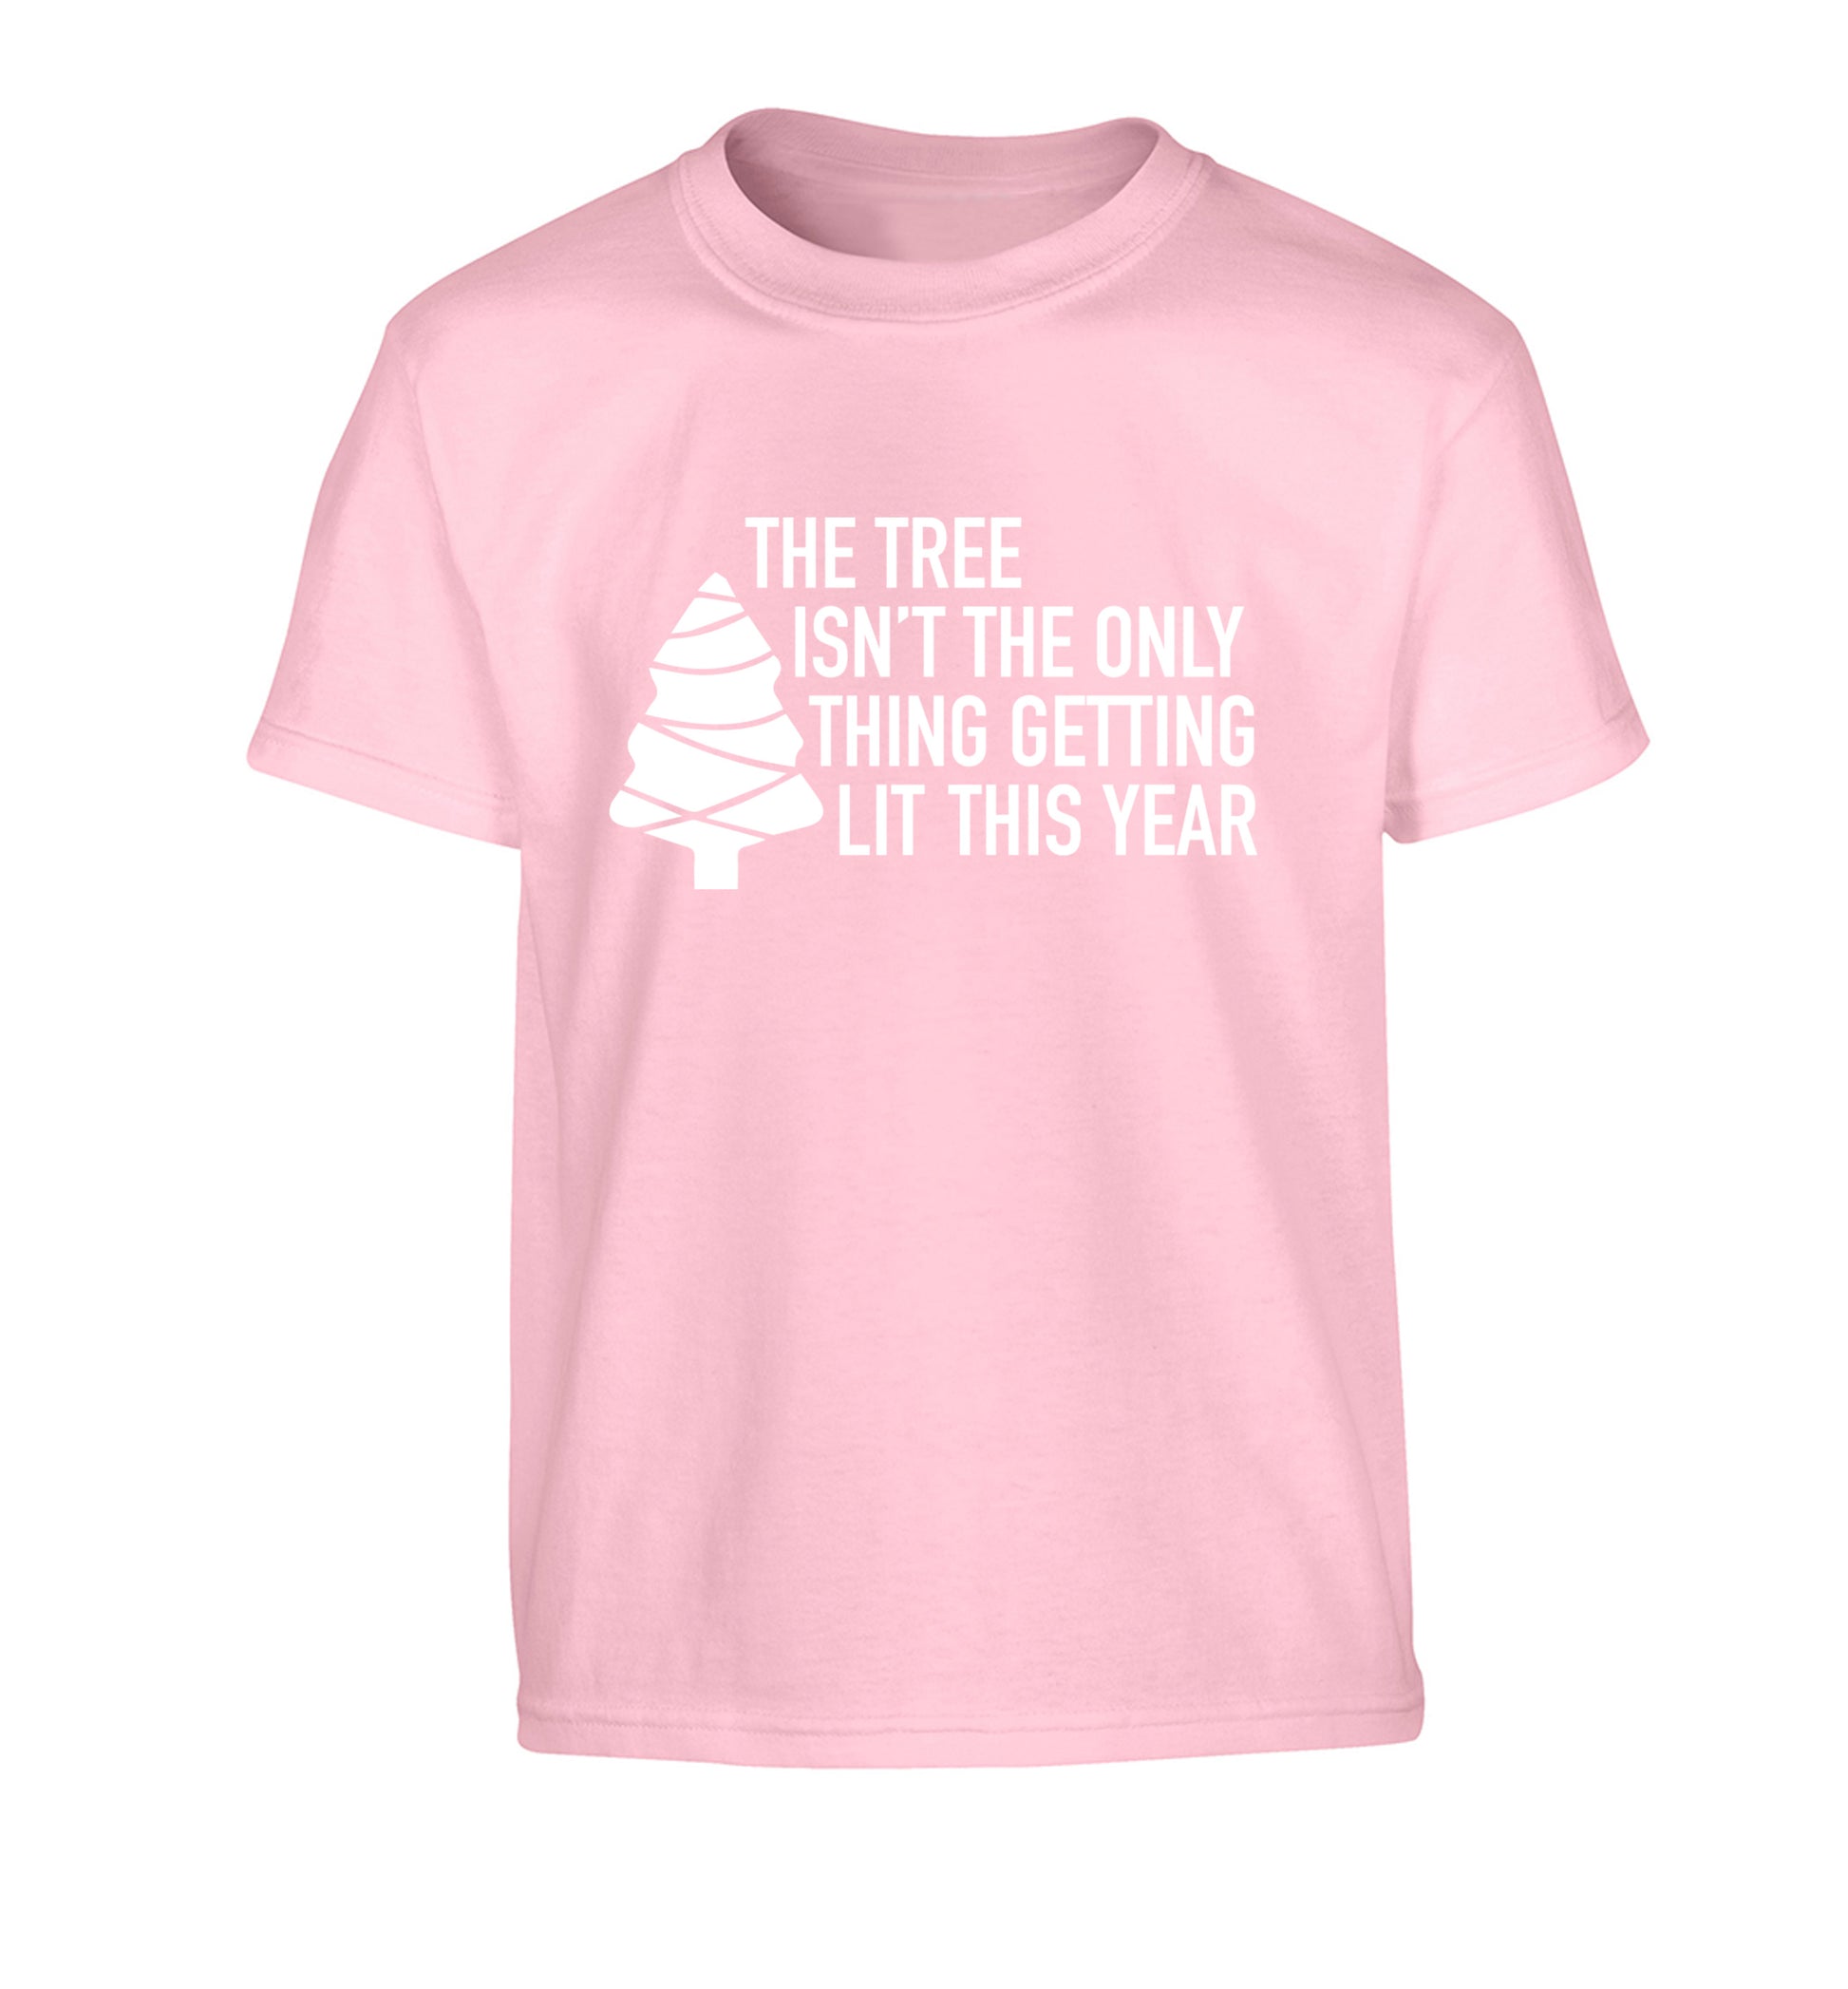 The tree isn't the only thing getting lit this year Children's light pink Tshirt 12-14 Years